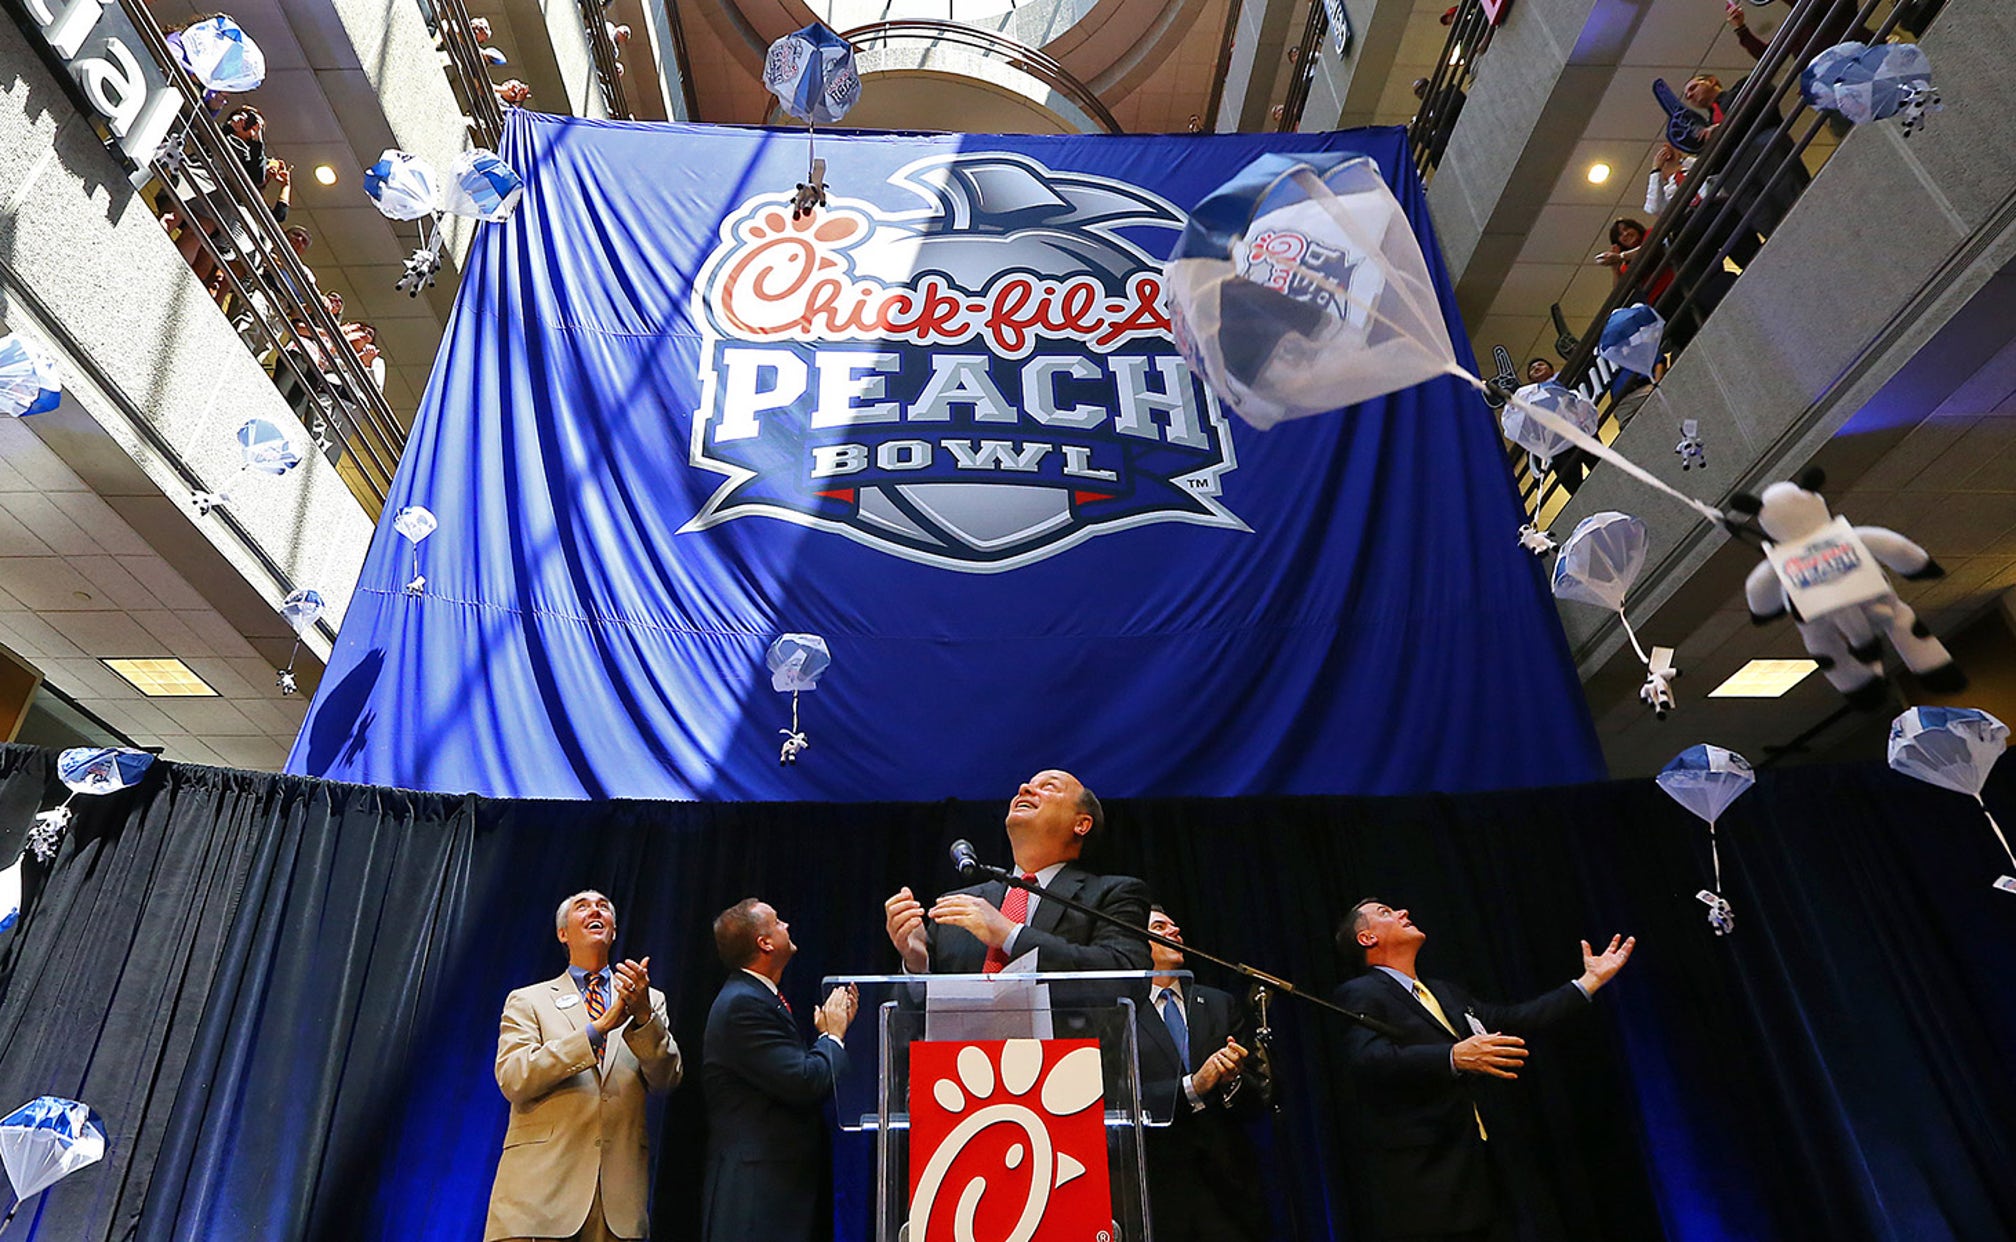 Rebranded ChickfilA Peach Bowl has sights on hosting title game FOX